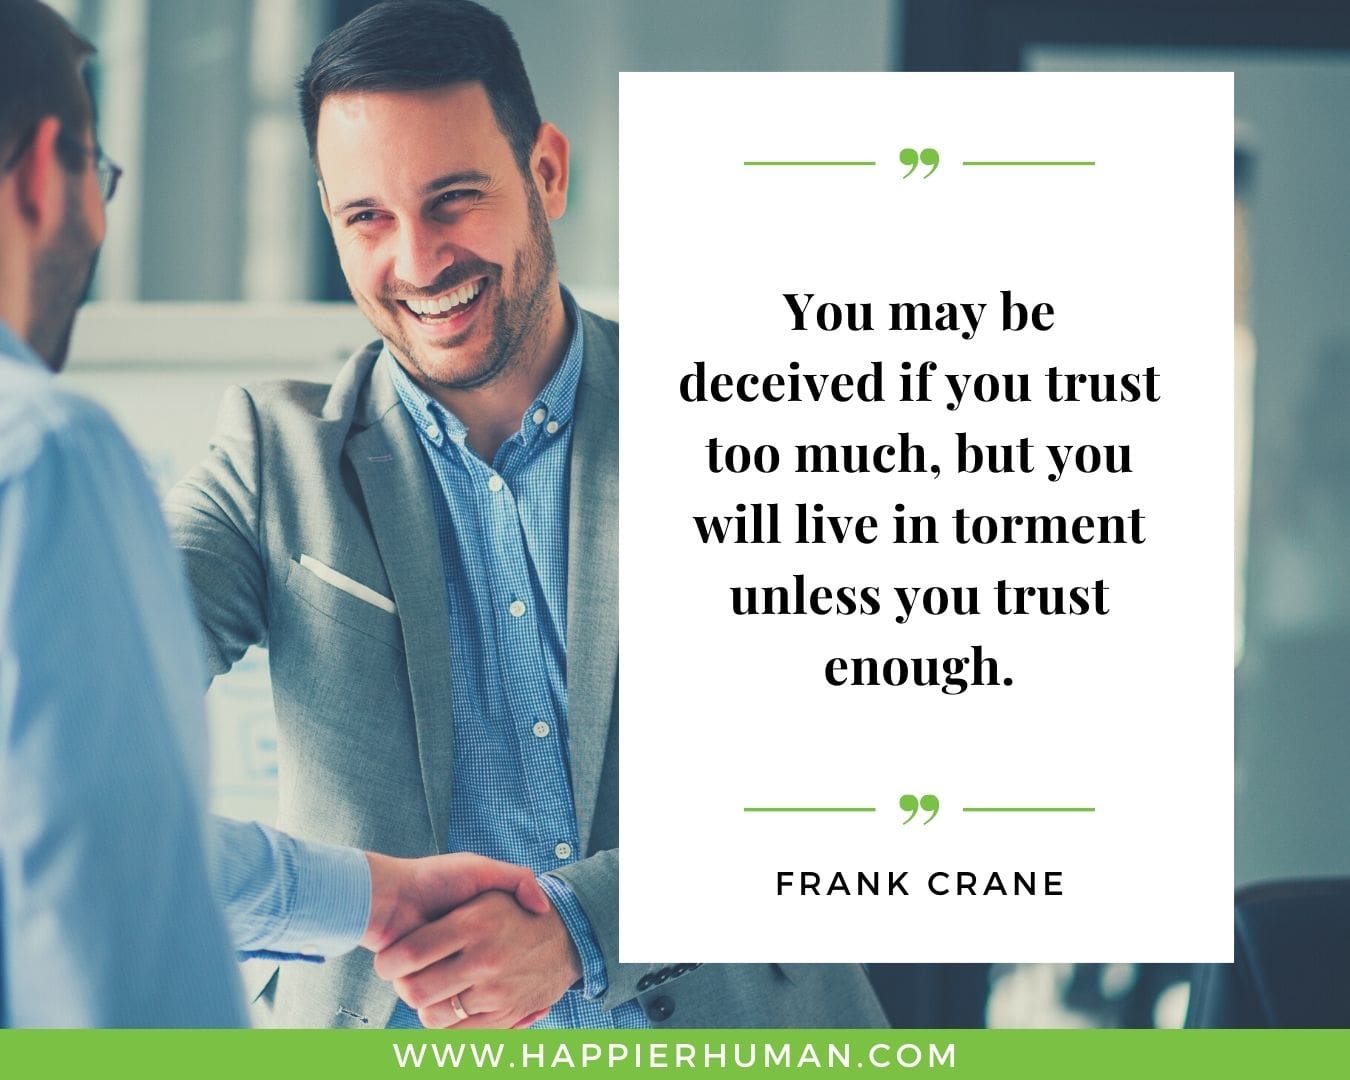 Broken Trust Quotes - “You may be deceived if you trust too much, but you will live in torment unless you trust enough.” - Frank Crane